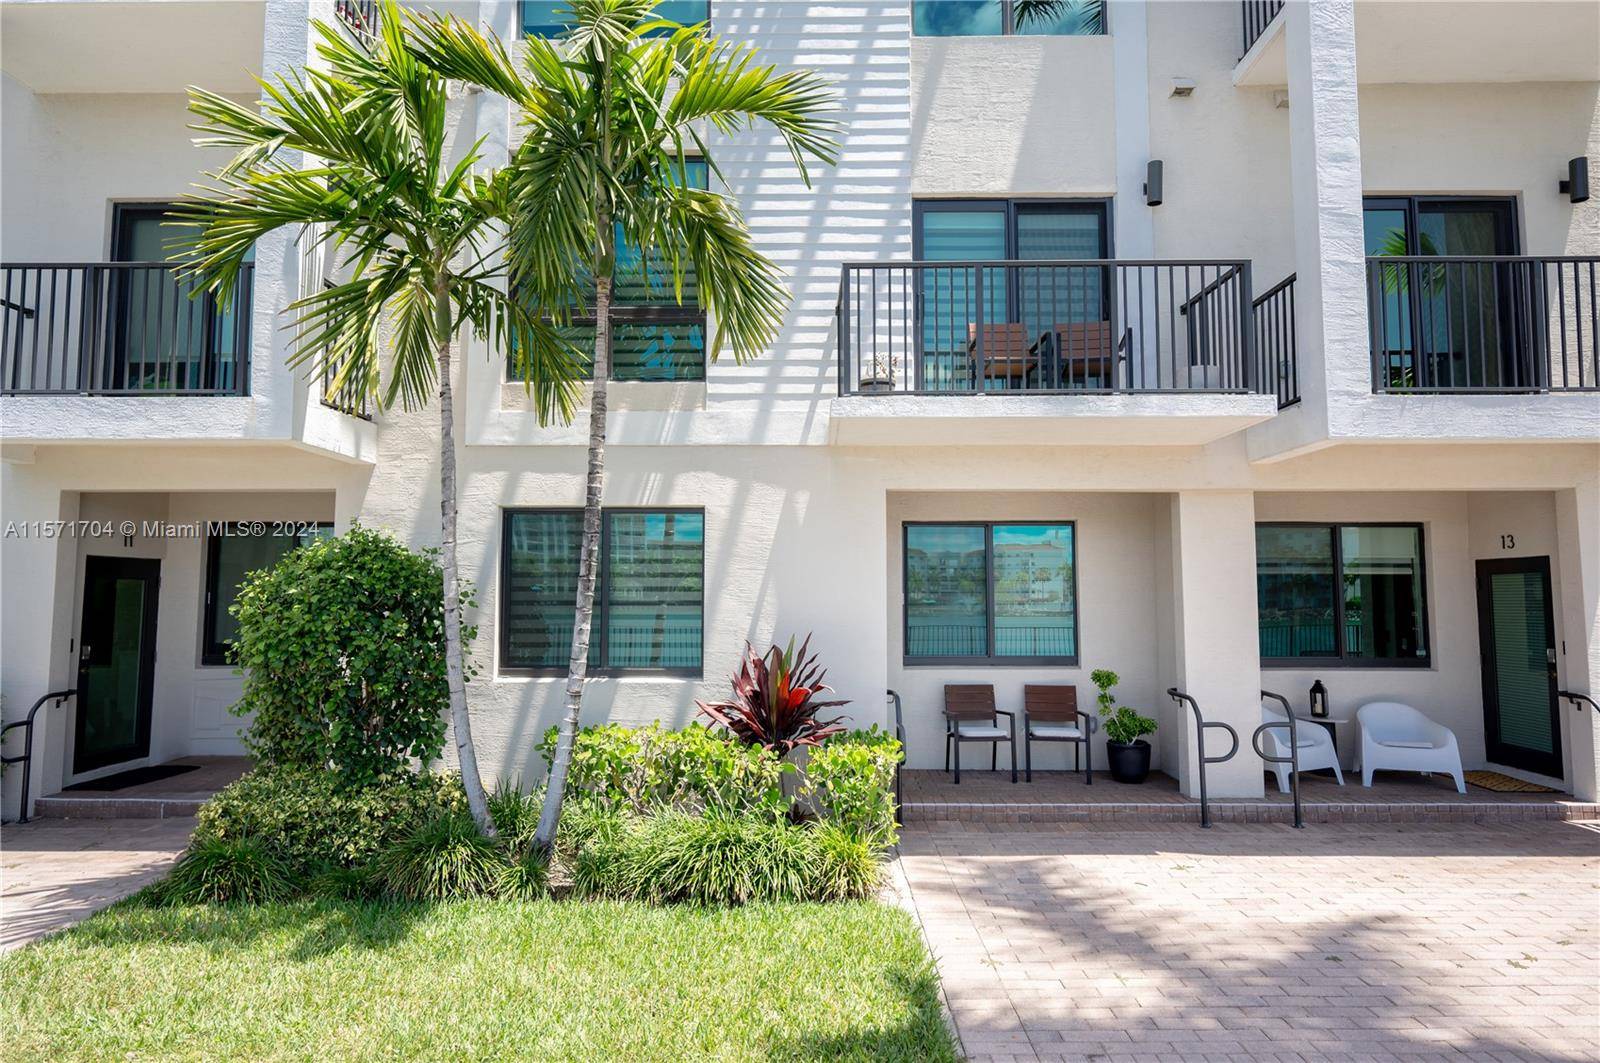 The beautiful, spacious 2 story apartment offers 3 bedrooms and 2.